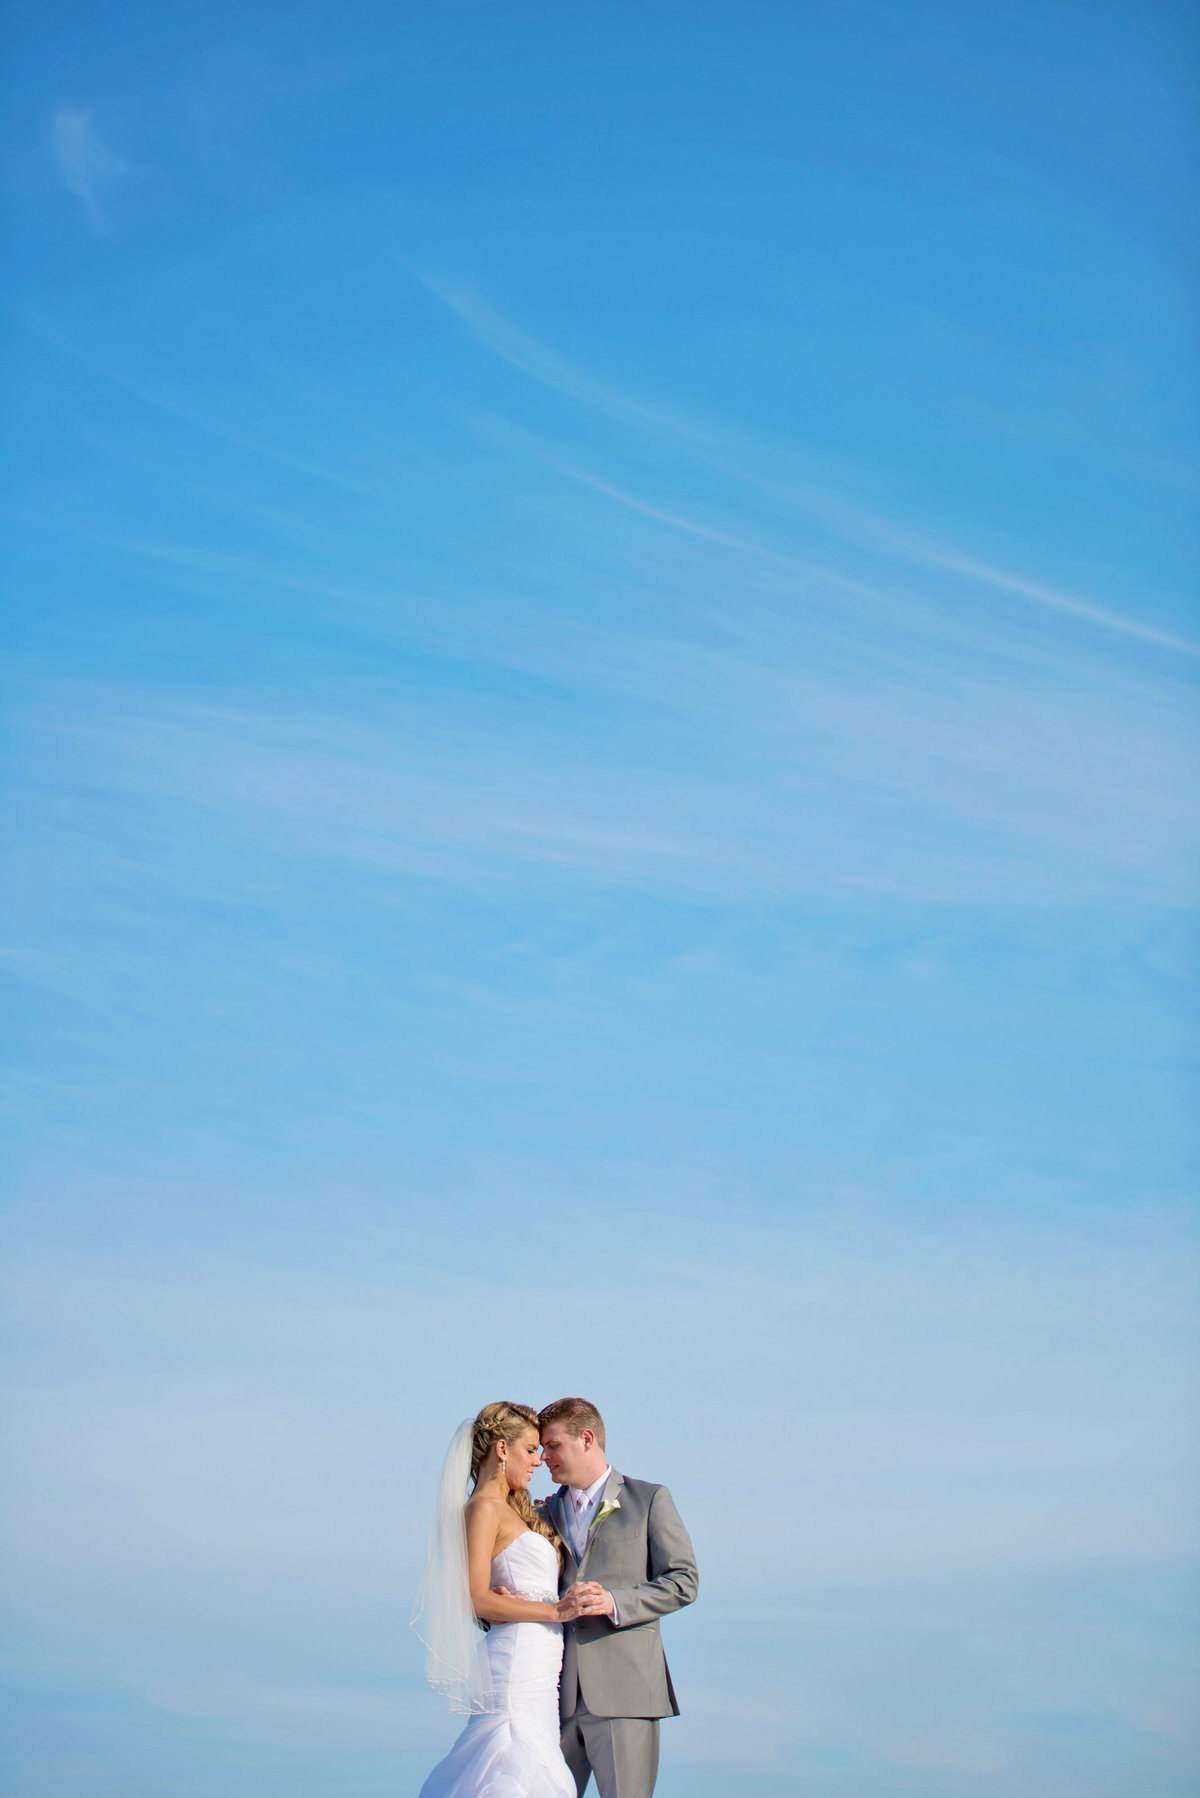 Bride and groom photo with blue skies at Oceanbleu